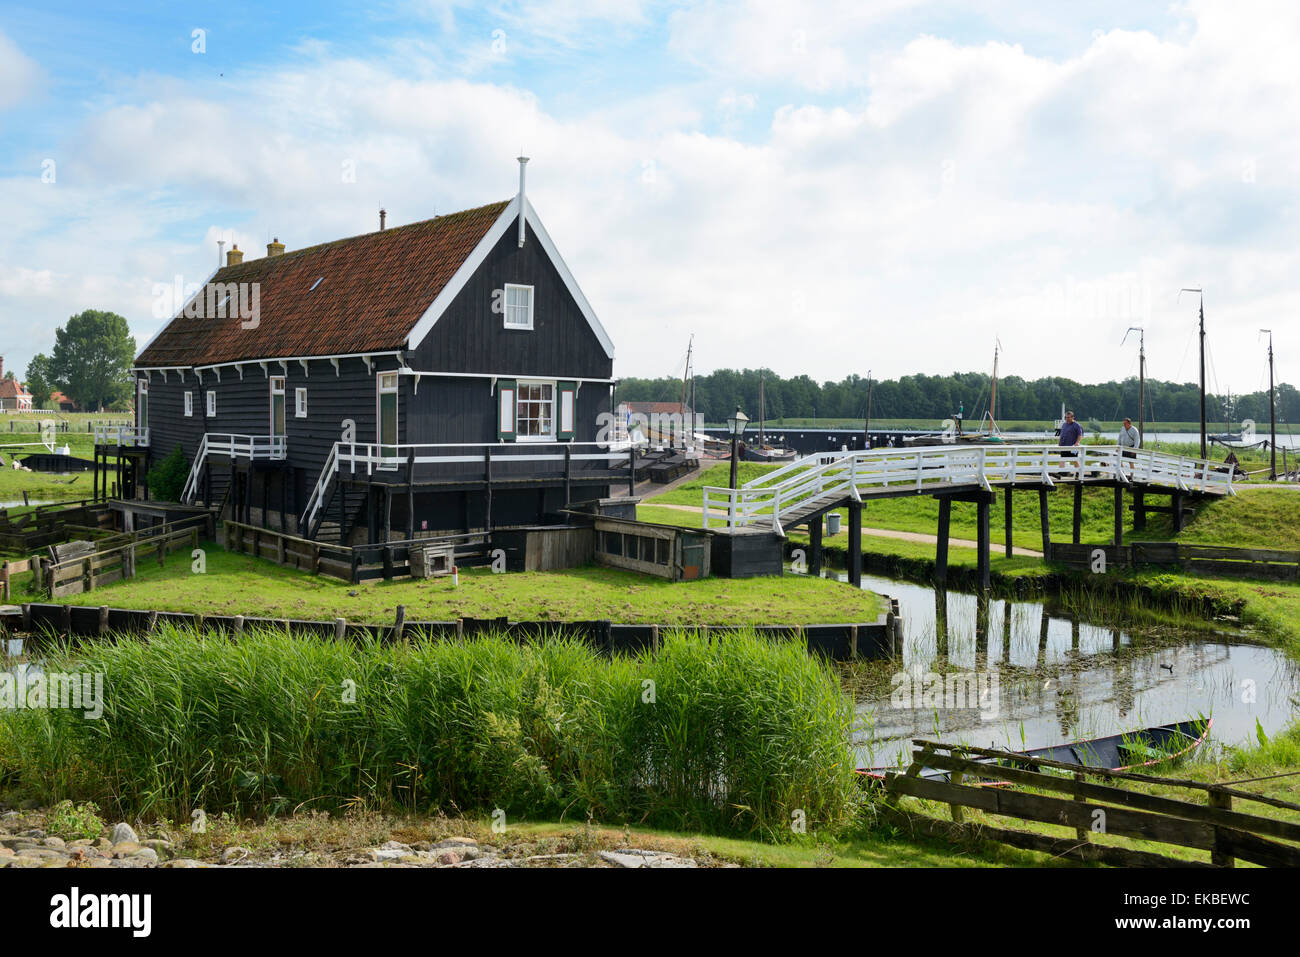 Canal and traditional building, Zuiderzee Open Air Museum, Lake Ijssel, Enkhuizen, North Holland, Netherlands, Europe Stock Photo